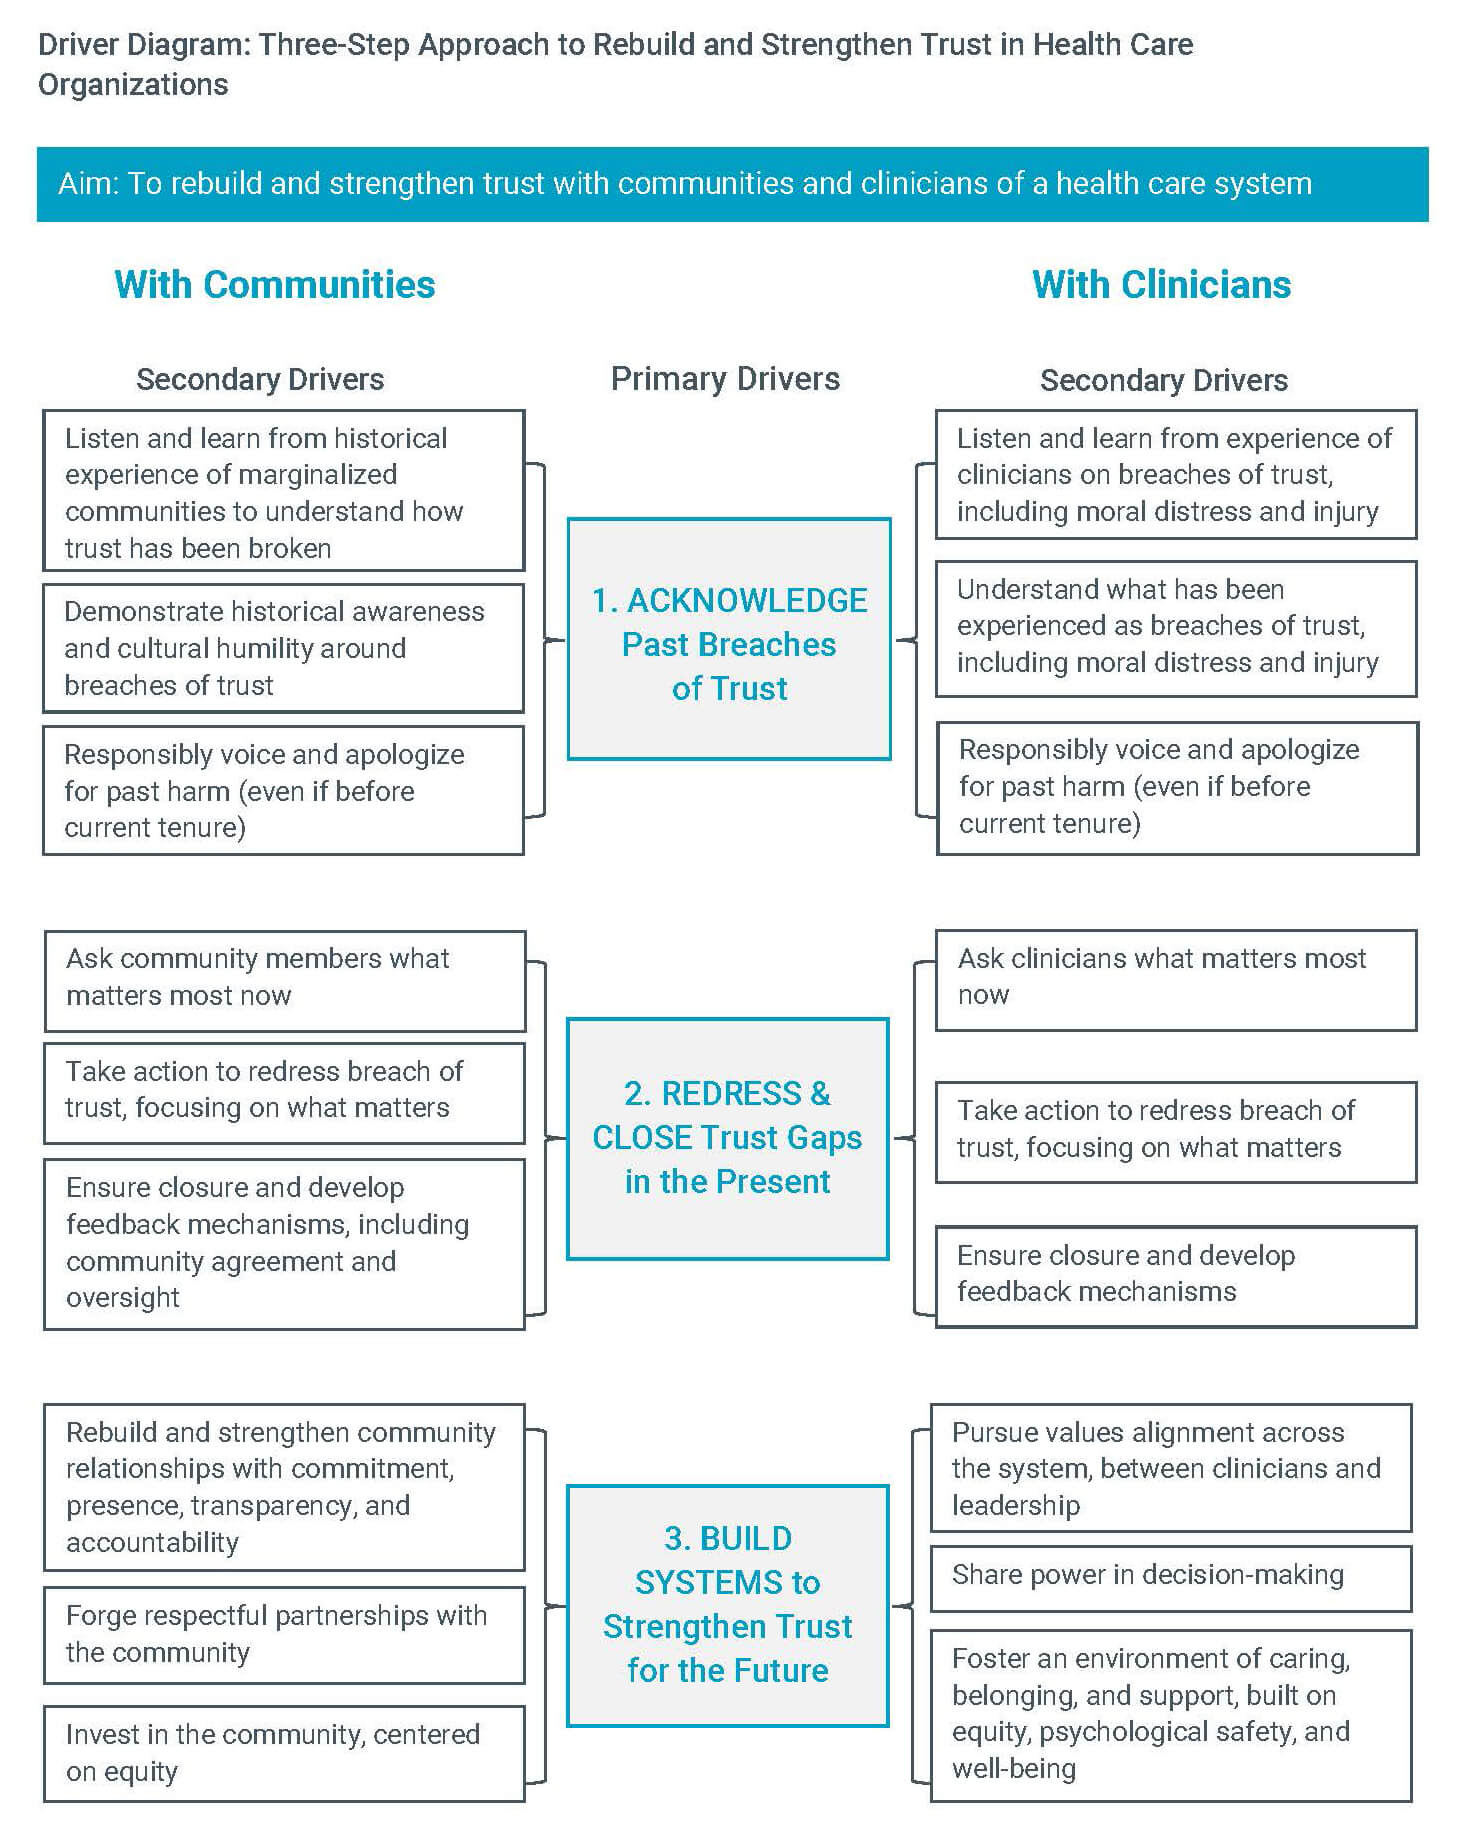 Driver Diagram: Three-Step Approach to Rebuild and Strengthen Trust in Health Care Organizations